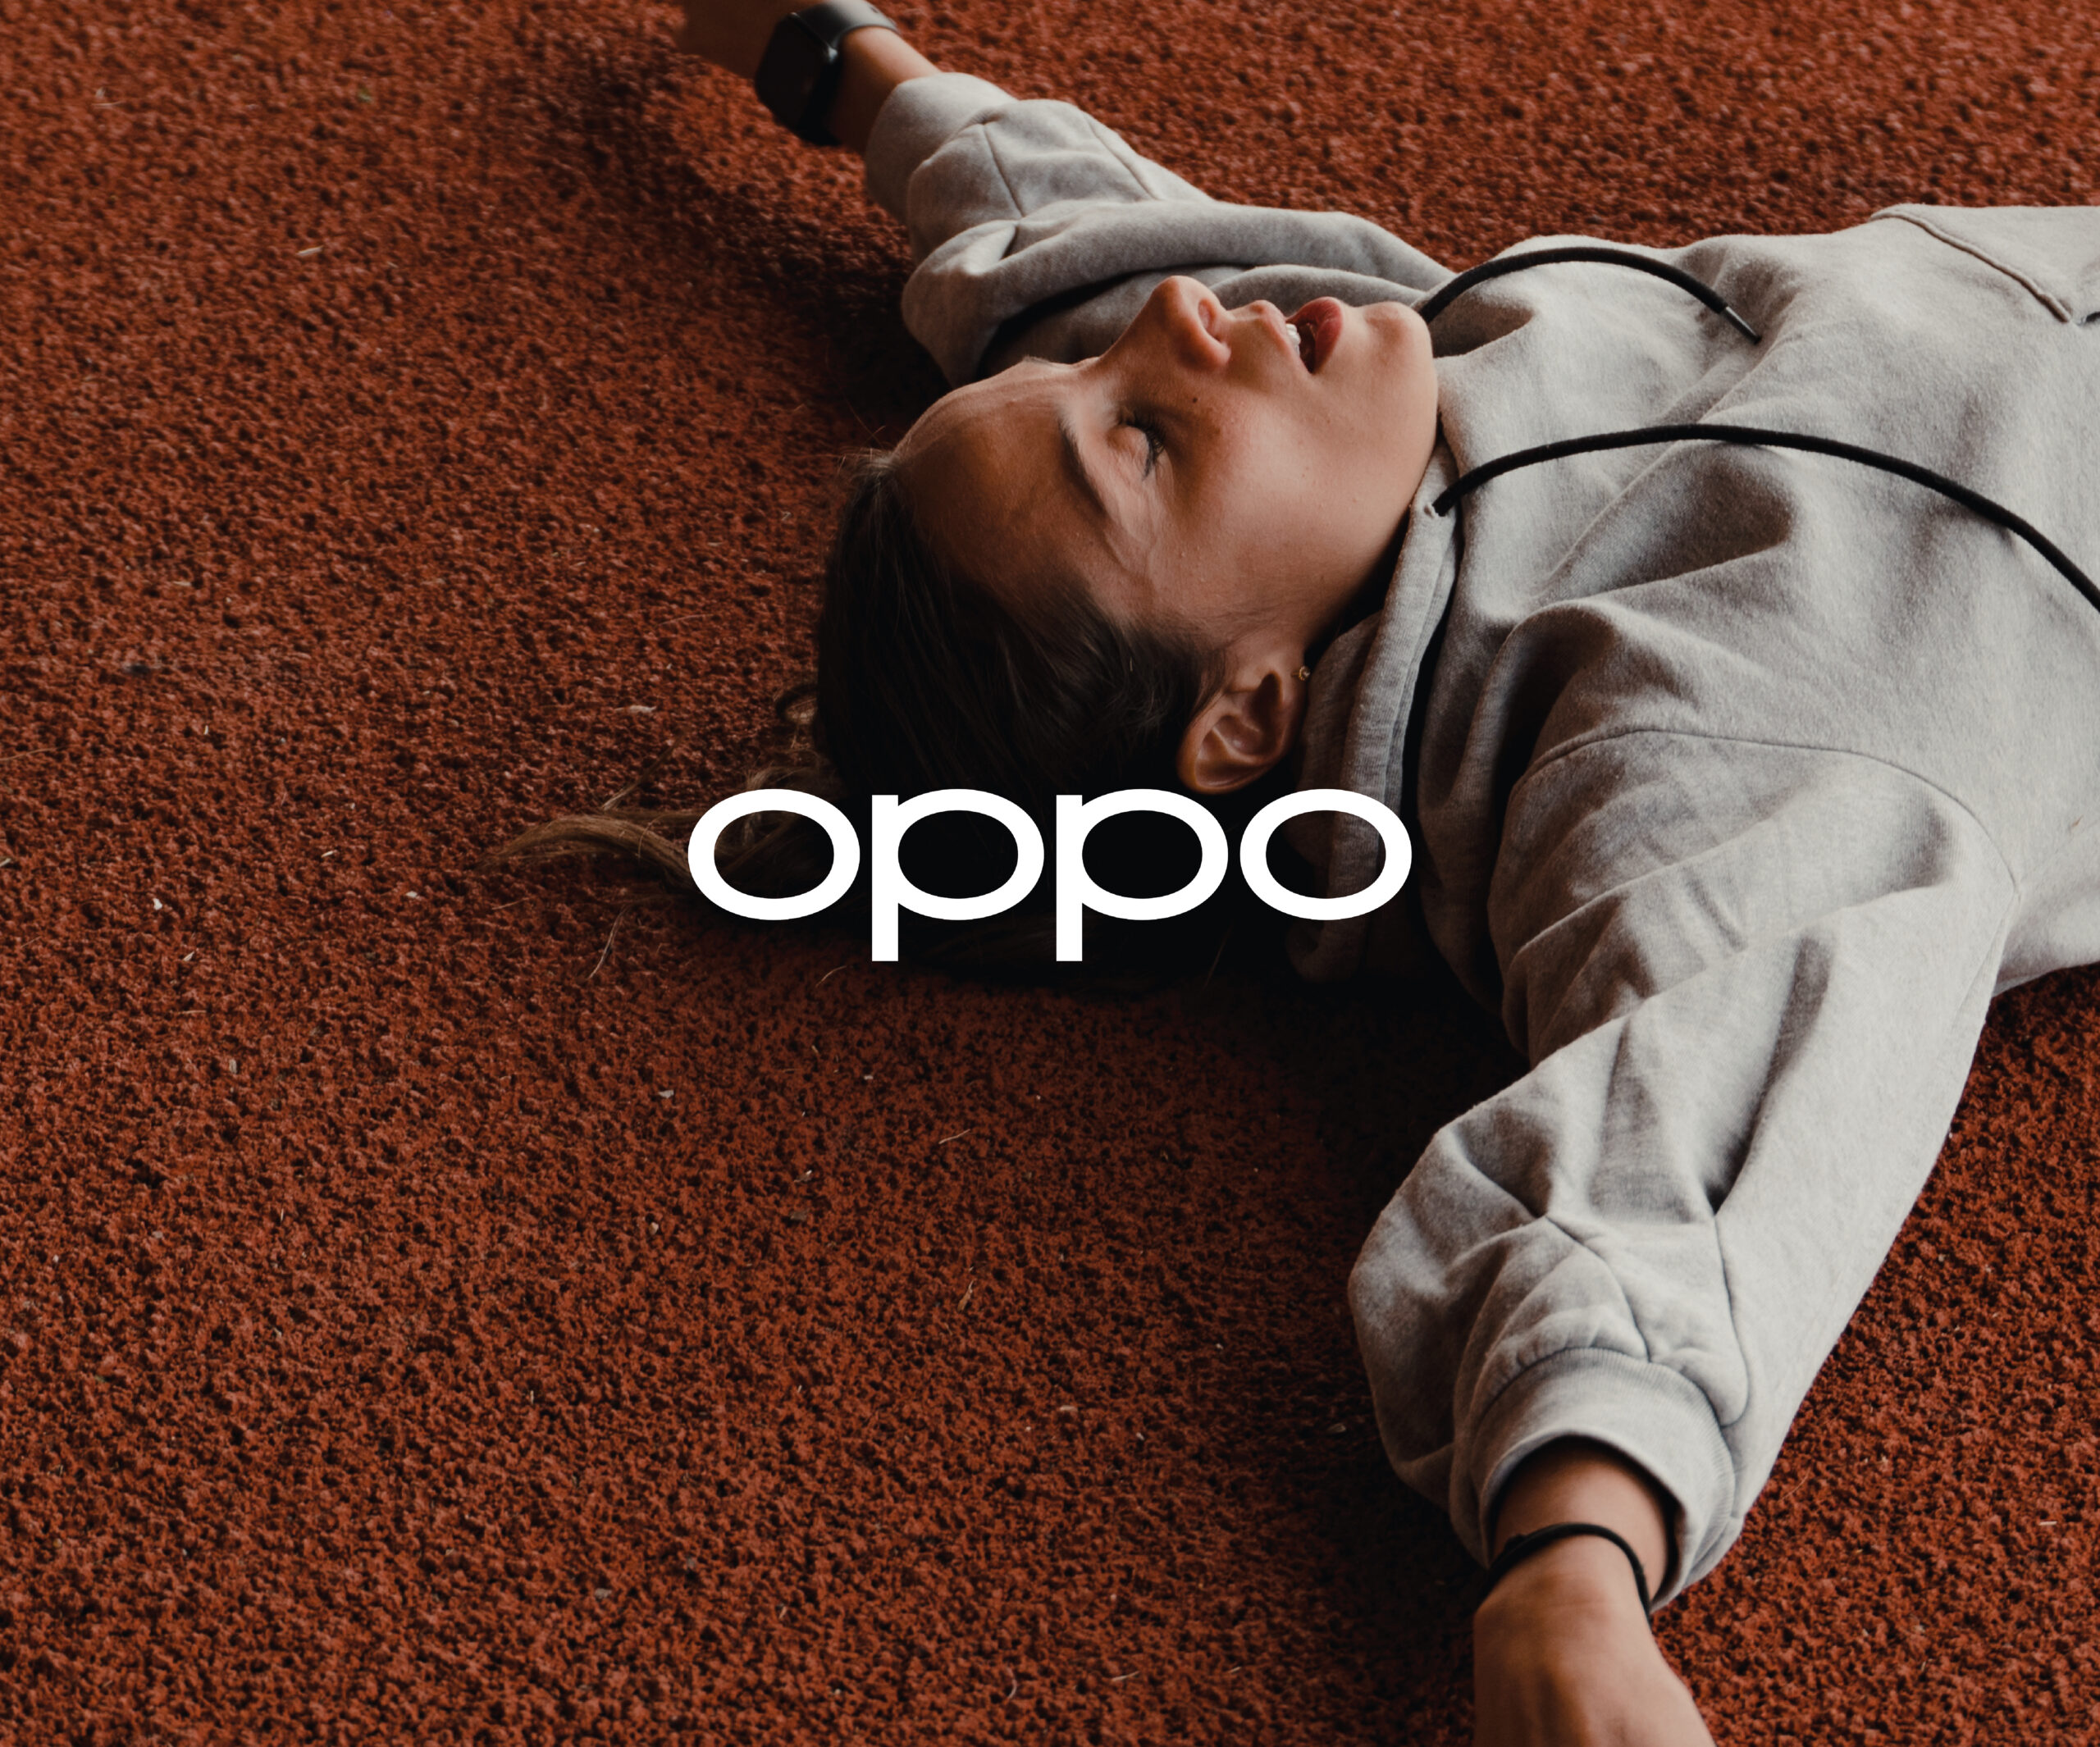 OPPO Advertising Campaign